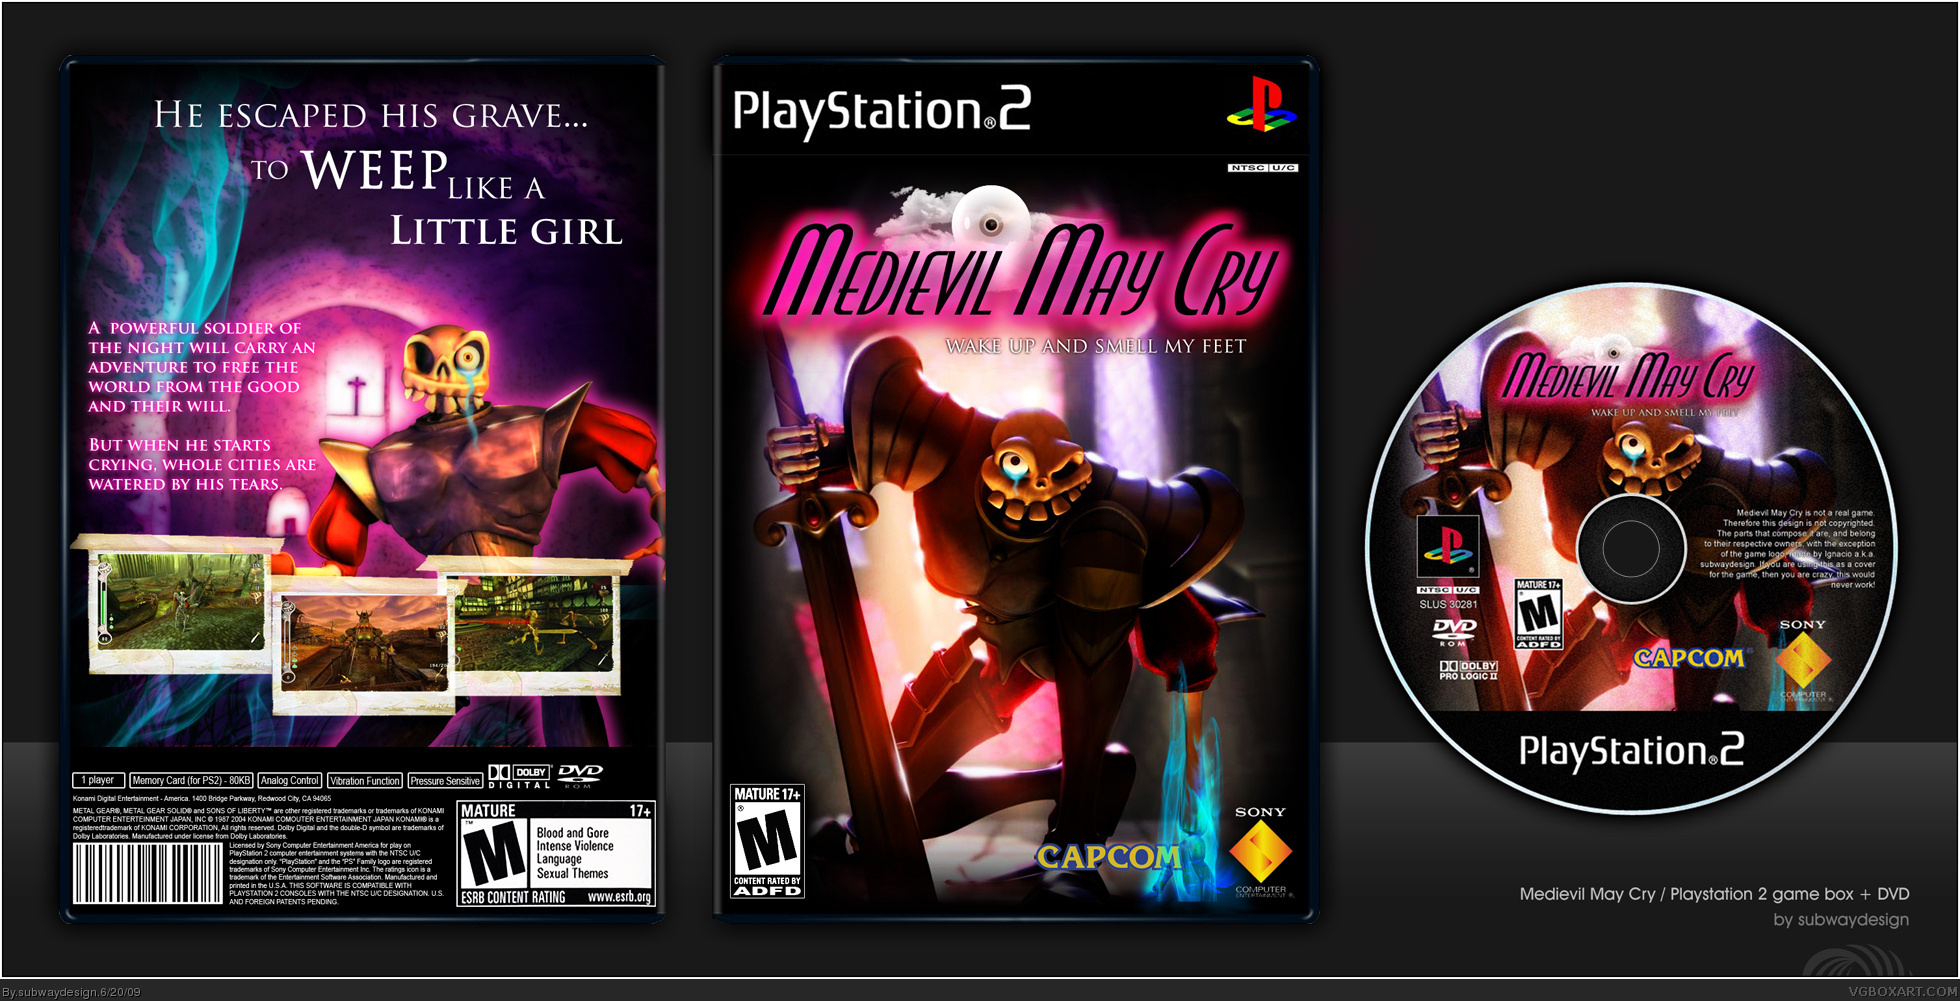 Medievil May Cry box cover